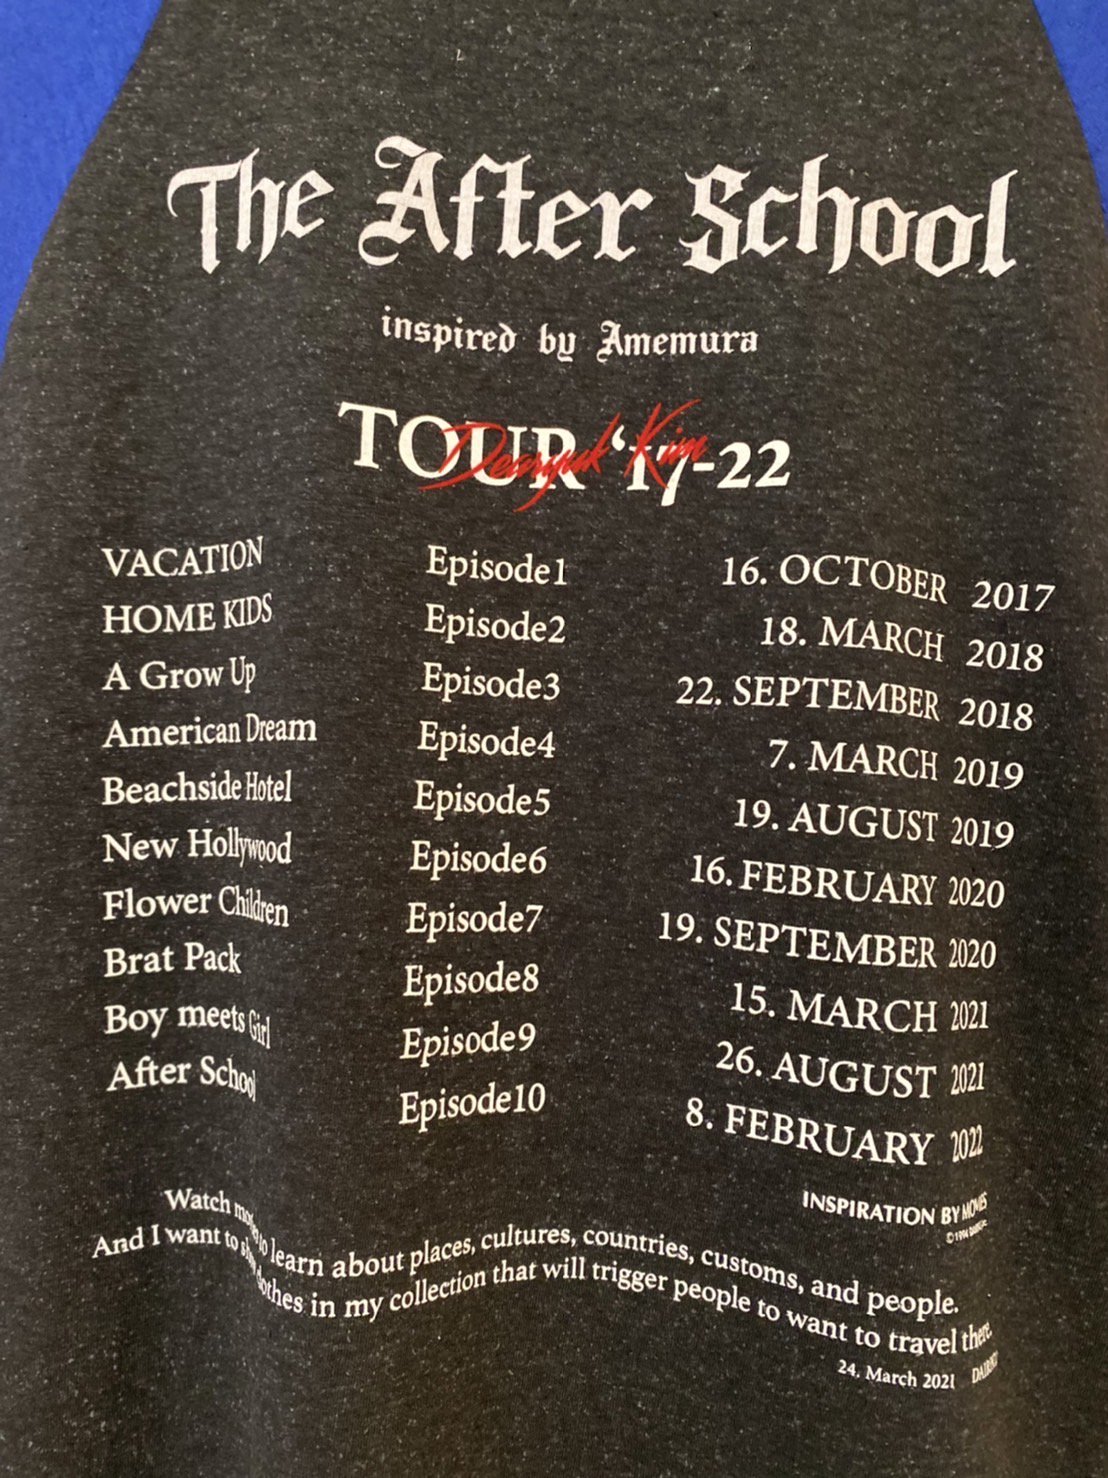 DAIRIKU<br />The After School Tour Raglan Tee / Black&Blue<img class='new_mark_img2' src='https://img.shop-pro.jp/img/new/icons14.gif' style='border:none;display:inline;margin:0px;padding:0px;width:auto;' />